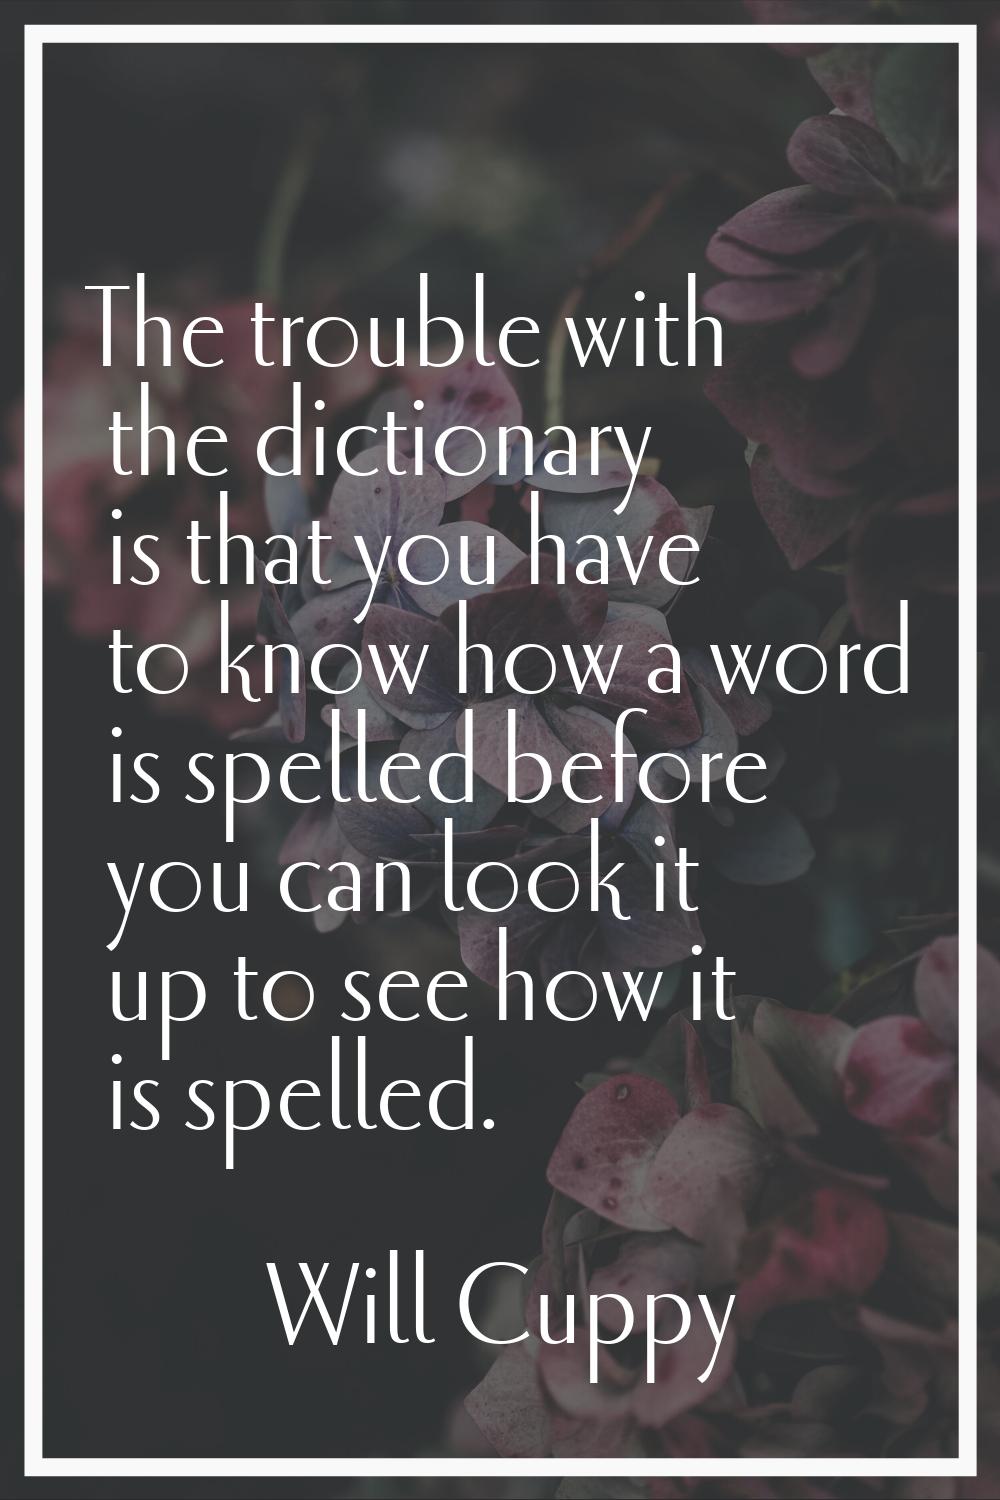 The trouble with the dictionary is that you have to know how a word is spelled before you can look 